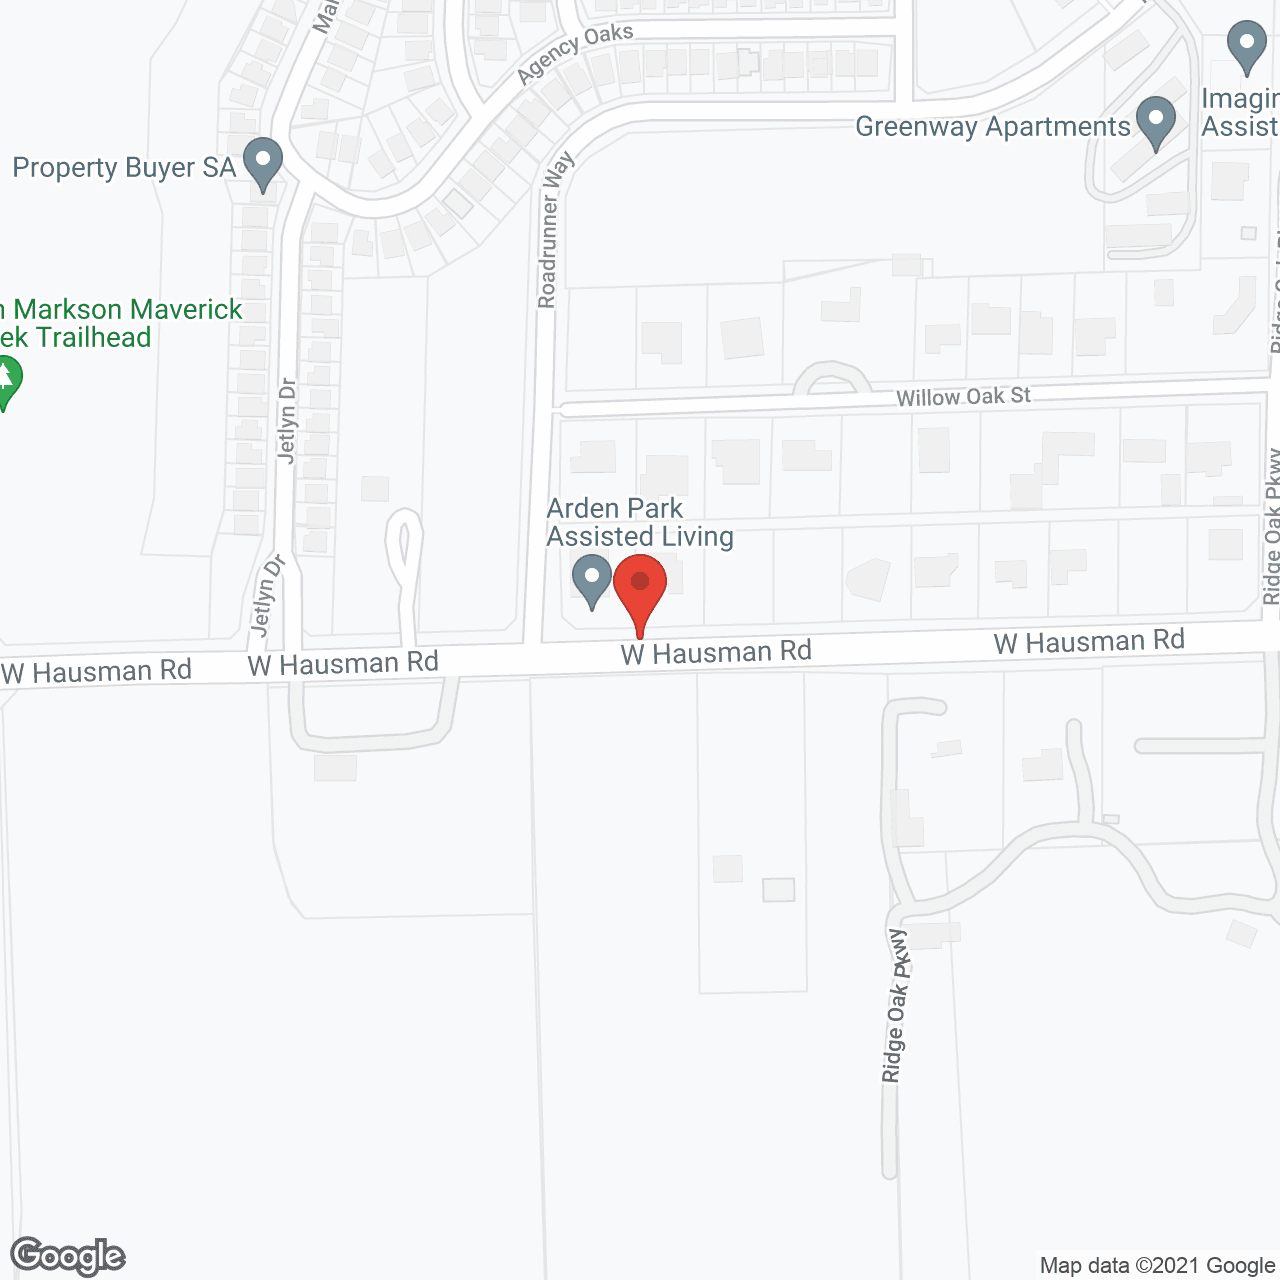 Arden Park Assisted Living in google map